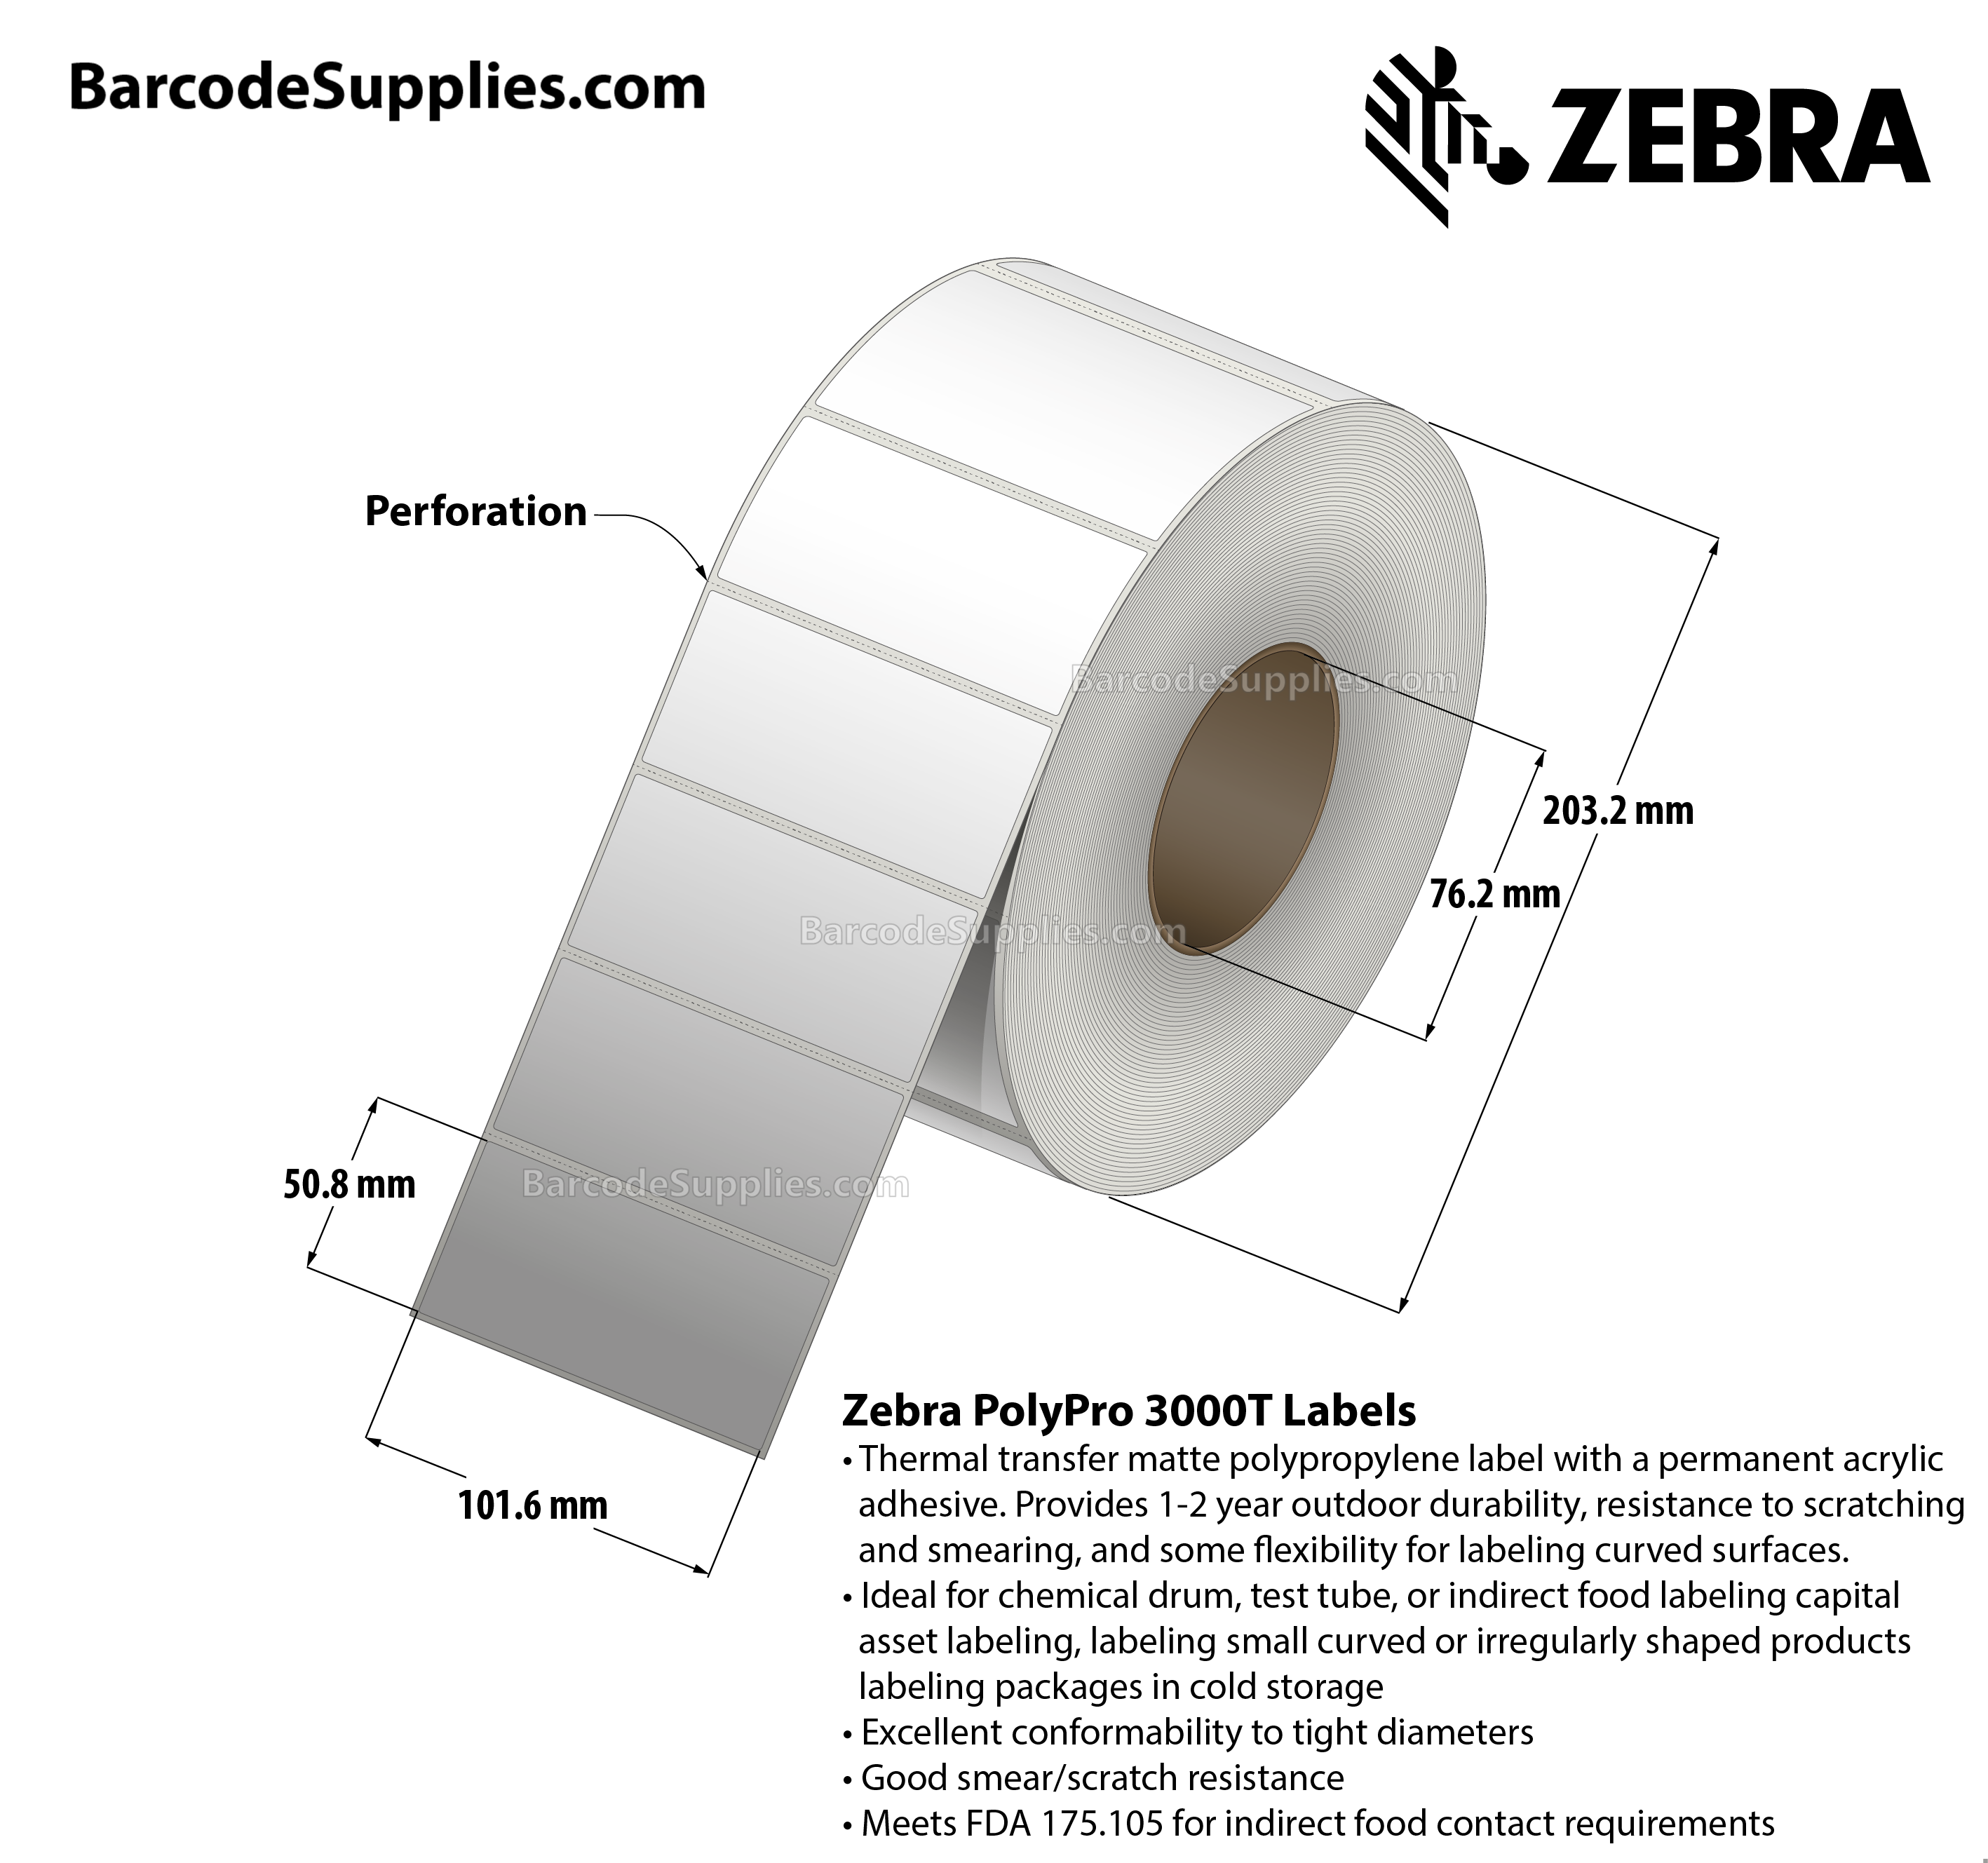 4 x 2 Thermal Transfer White PolyPro 3000T Labels With Permanent Adhesive - Perforated - 2441 Labels Per Roll - Carton Of 4 Rolls - 9764 Labels Total - MPN: 10011994